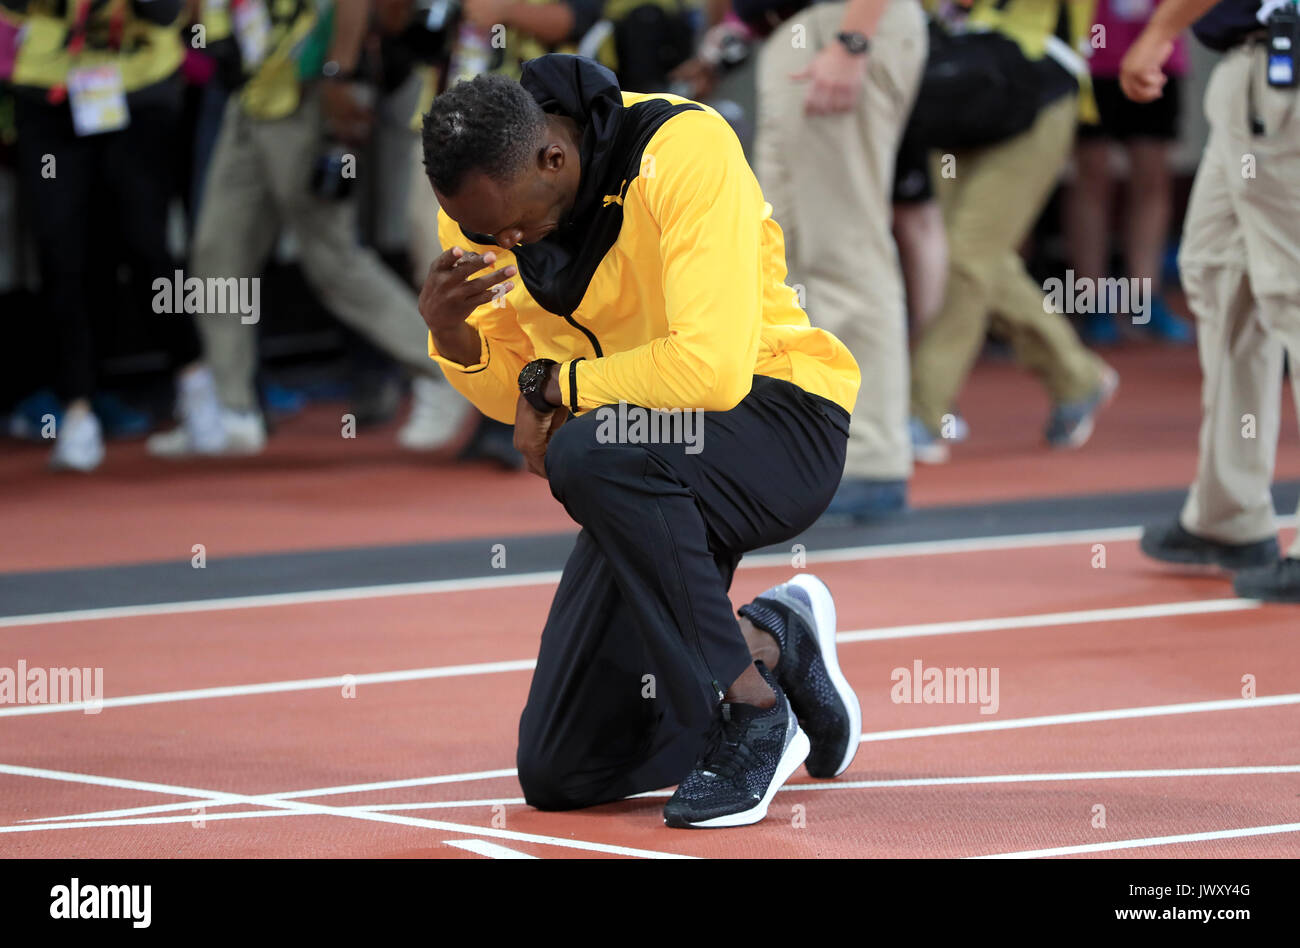 Jamaica's Usain Bolt on his lap of honour during day ten of the 2017 IAAF World Championships at the London Stadium. PRESS ASSOCIATION Photo. Picture date: Sunday August 13, 2017. See PA story ATHLETICS World. Photo credit should read: Adam Davy/PA Wire. Stock Photo